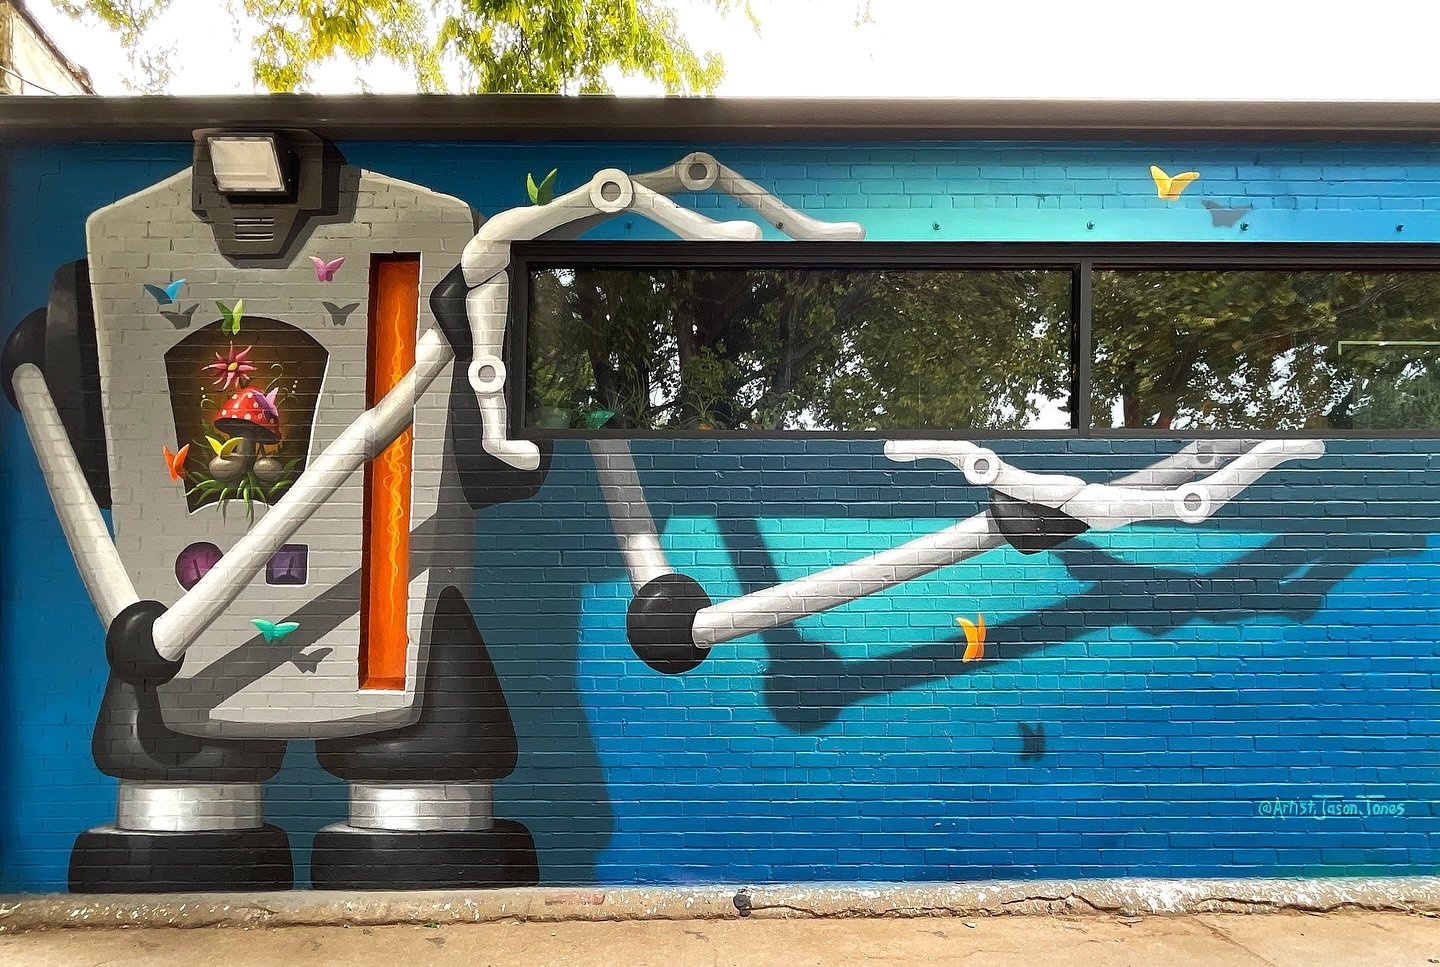 😜 HAPPY HUMP DAY 😜
Be sure to stroll through the @plazawalls alley to see this AWESOME mural created by @artistjasonjones for the 2023 Plaza Walls Mural Expo! Jason is an artist and muralist from Fayetteville Arkansas and he brought some FUN CREATI